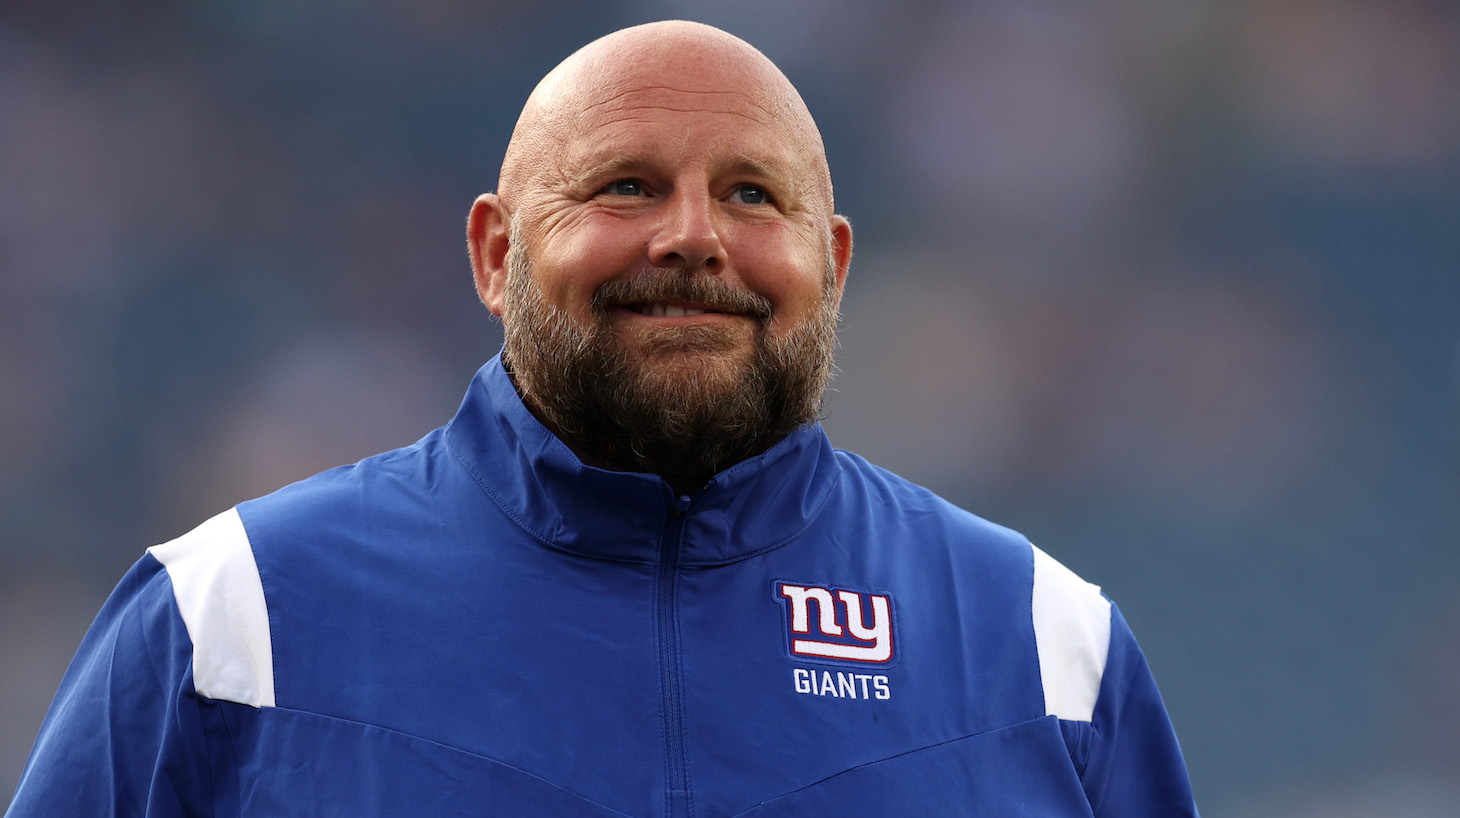 FOXBOROUGH, MASSACHUSETTS - AUGUST 11: Head coach Brian Daboll of the New York Giants looks on ahead of the the preseason game between the New York Giants and the New England Patriots at Gillette Stadium on August 11, 2022 in Foxborough, Massachusetts. (Photo by Maddie Meyer/Getty Images)